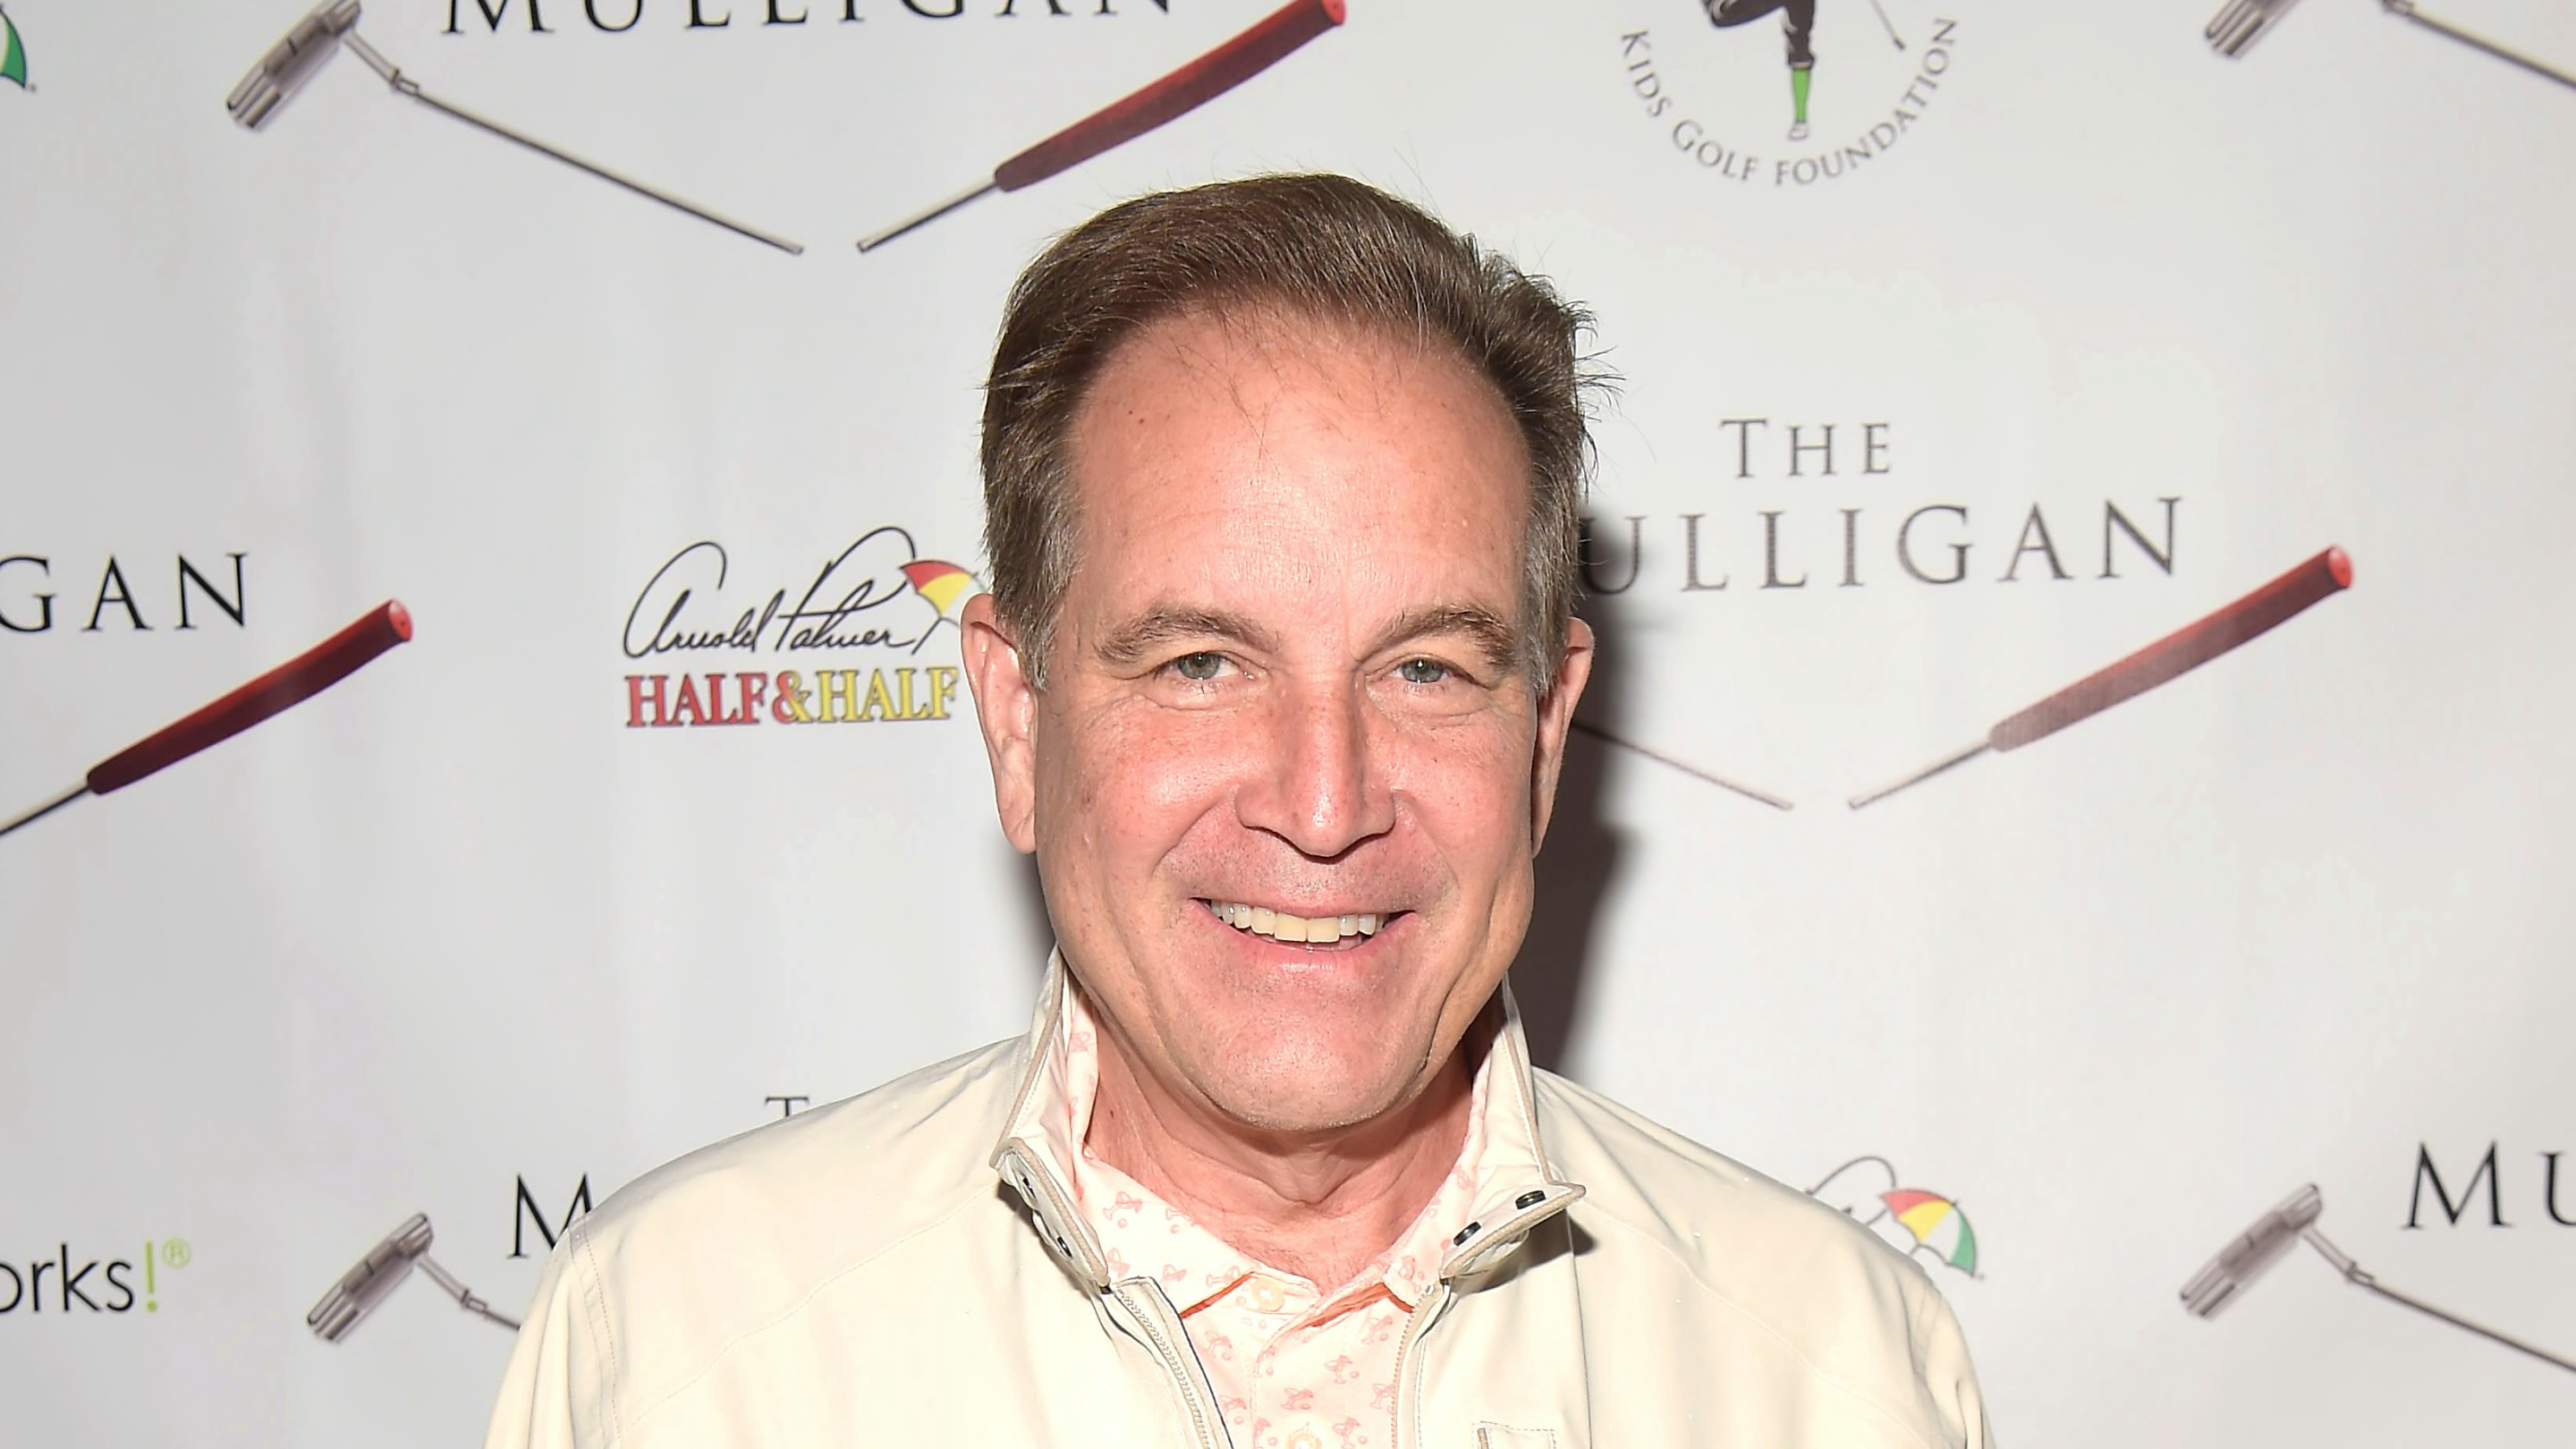 If Jim Nantz Goes Silent on a Golf Broadcast, It May Be Because He's
Choked Up